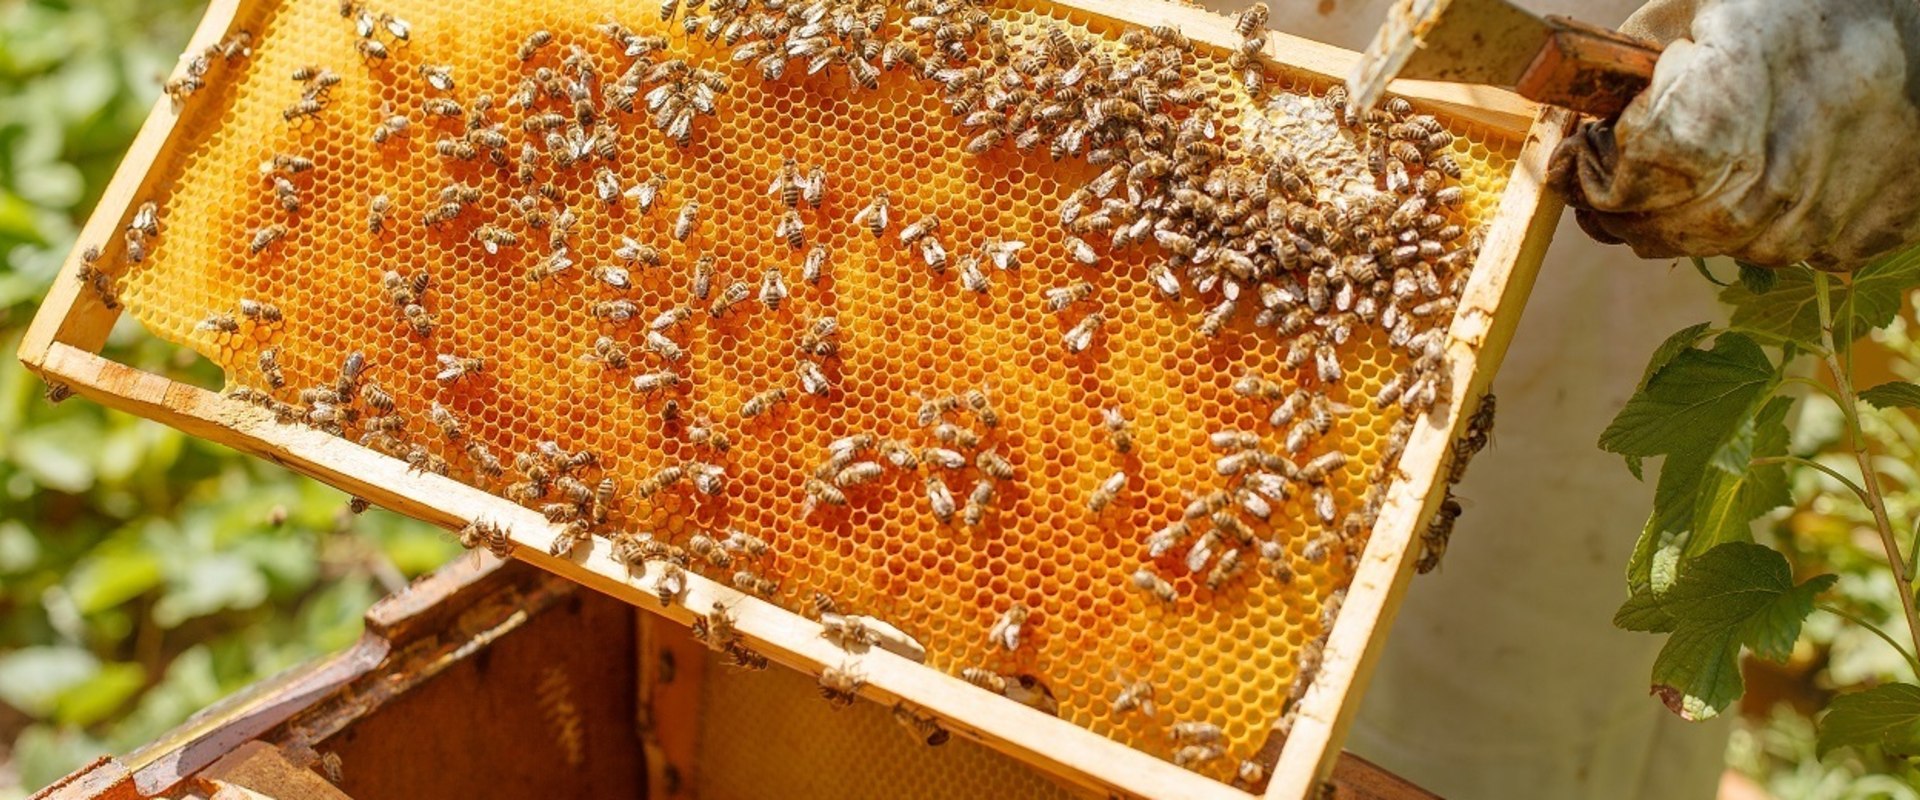 A Beginner's Guide to Beekeeping: Safety Precautions for a Successful Start